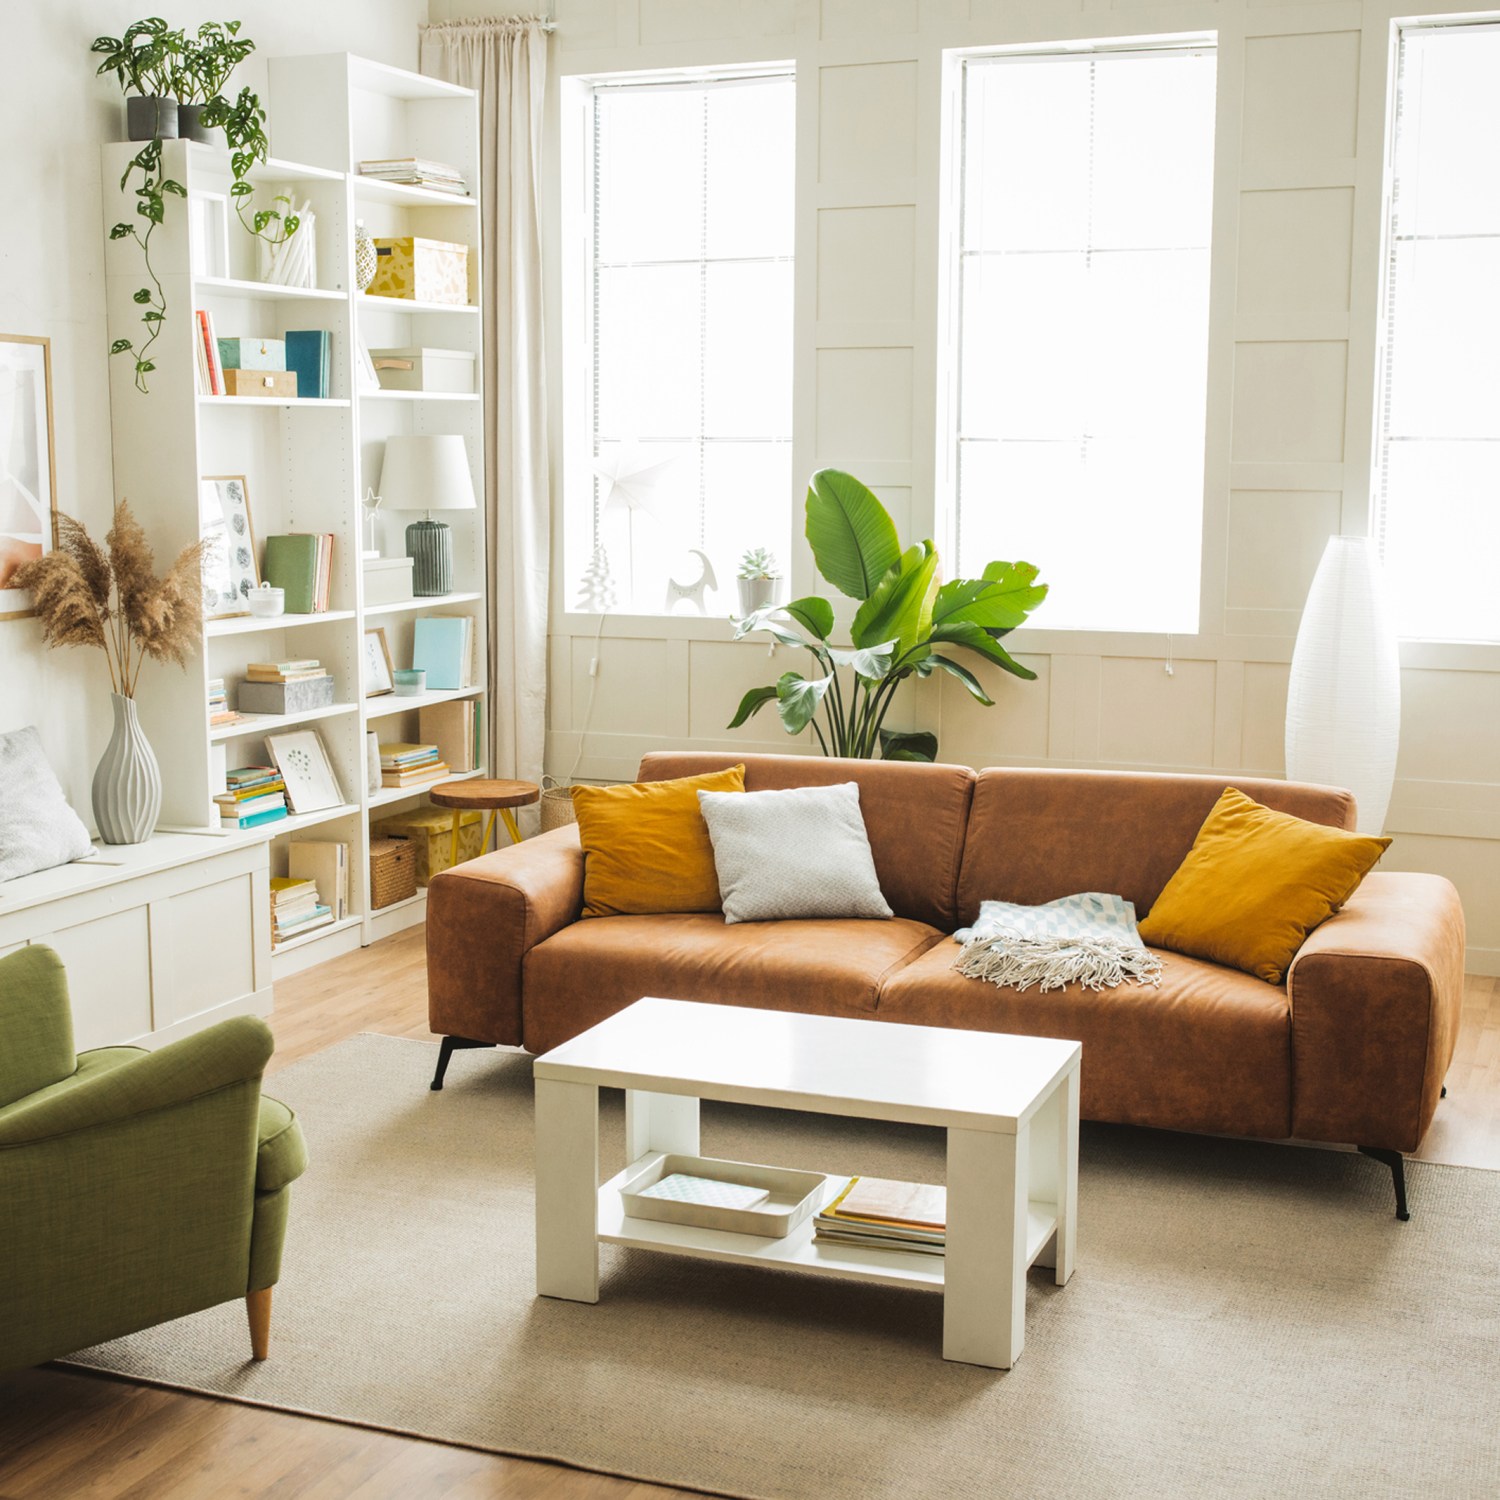 house interior of organized home living room with leather sofa, green armchair, storage, table and plants